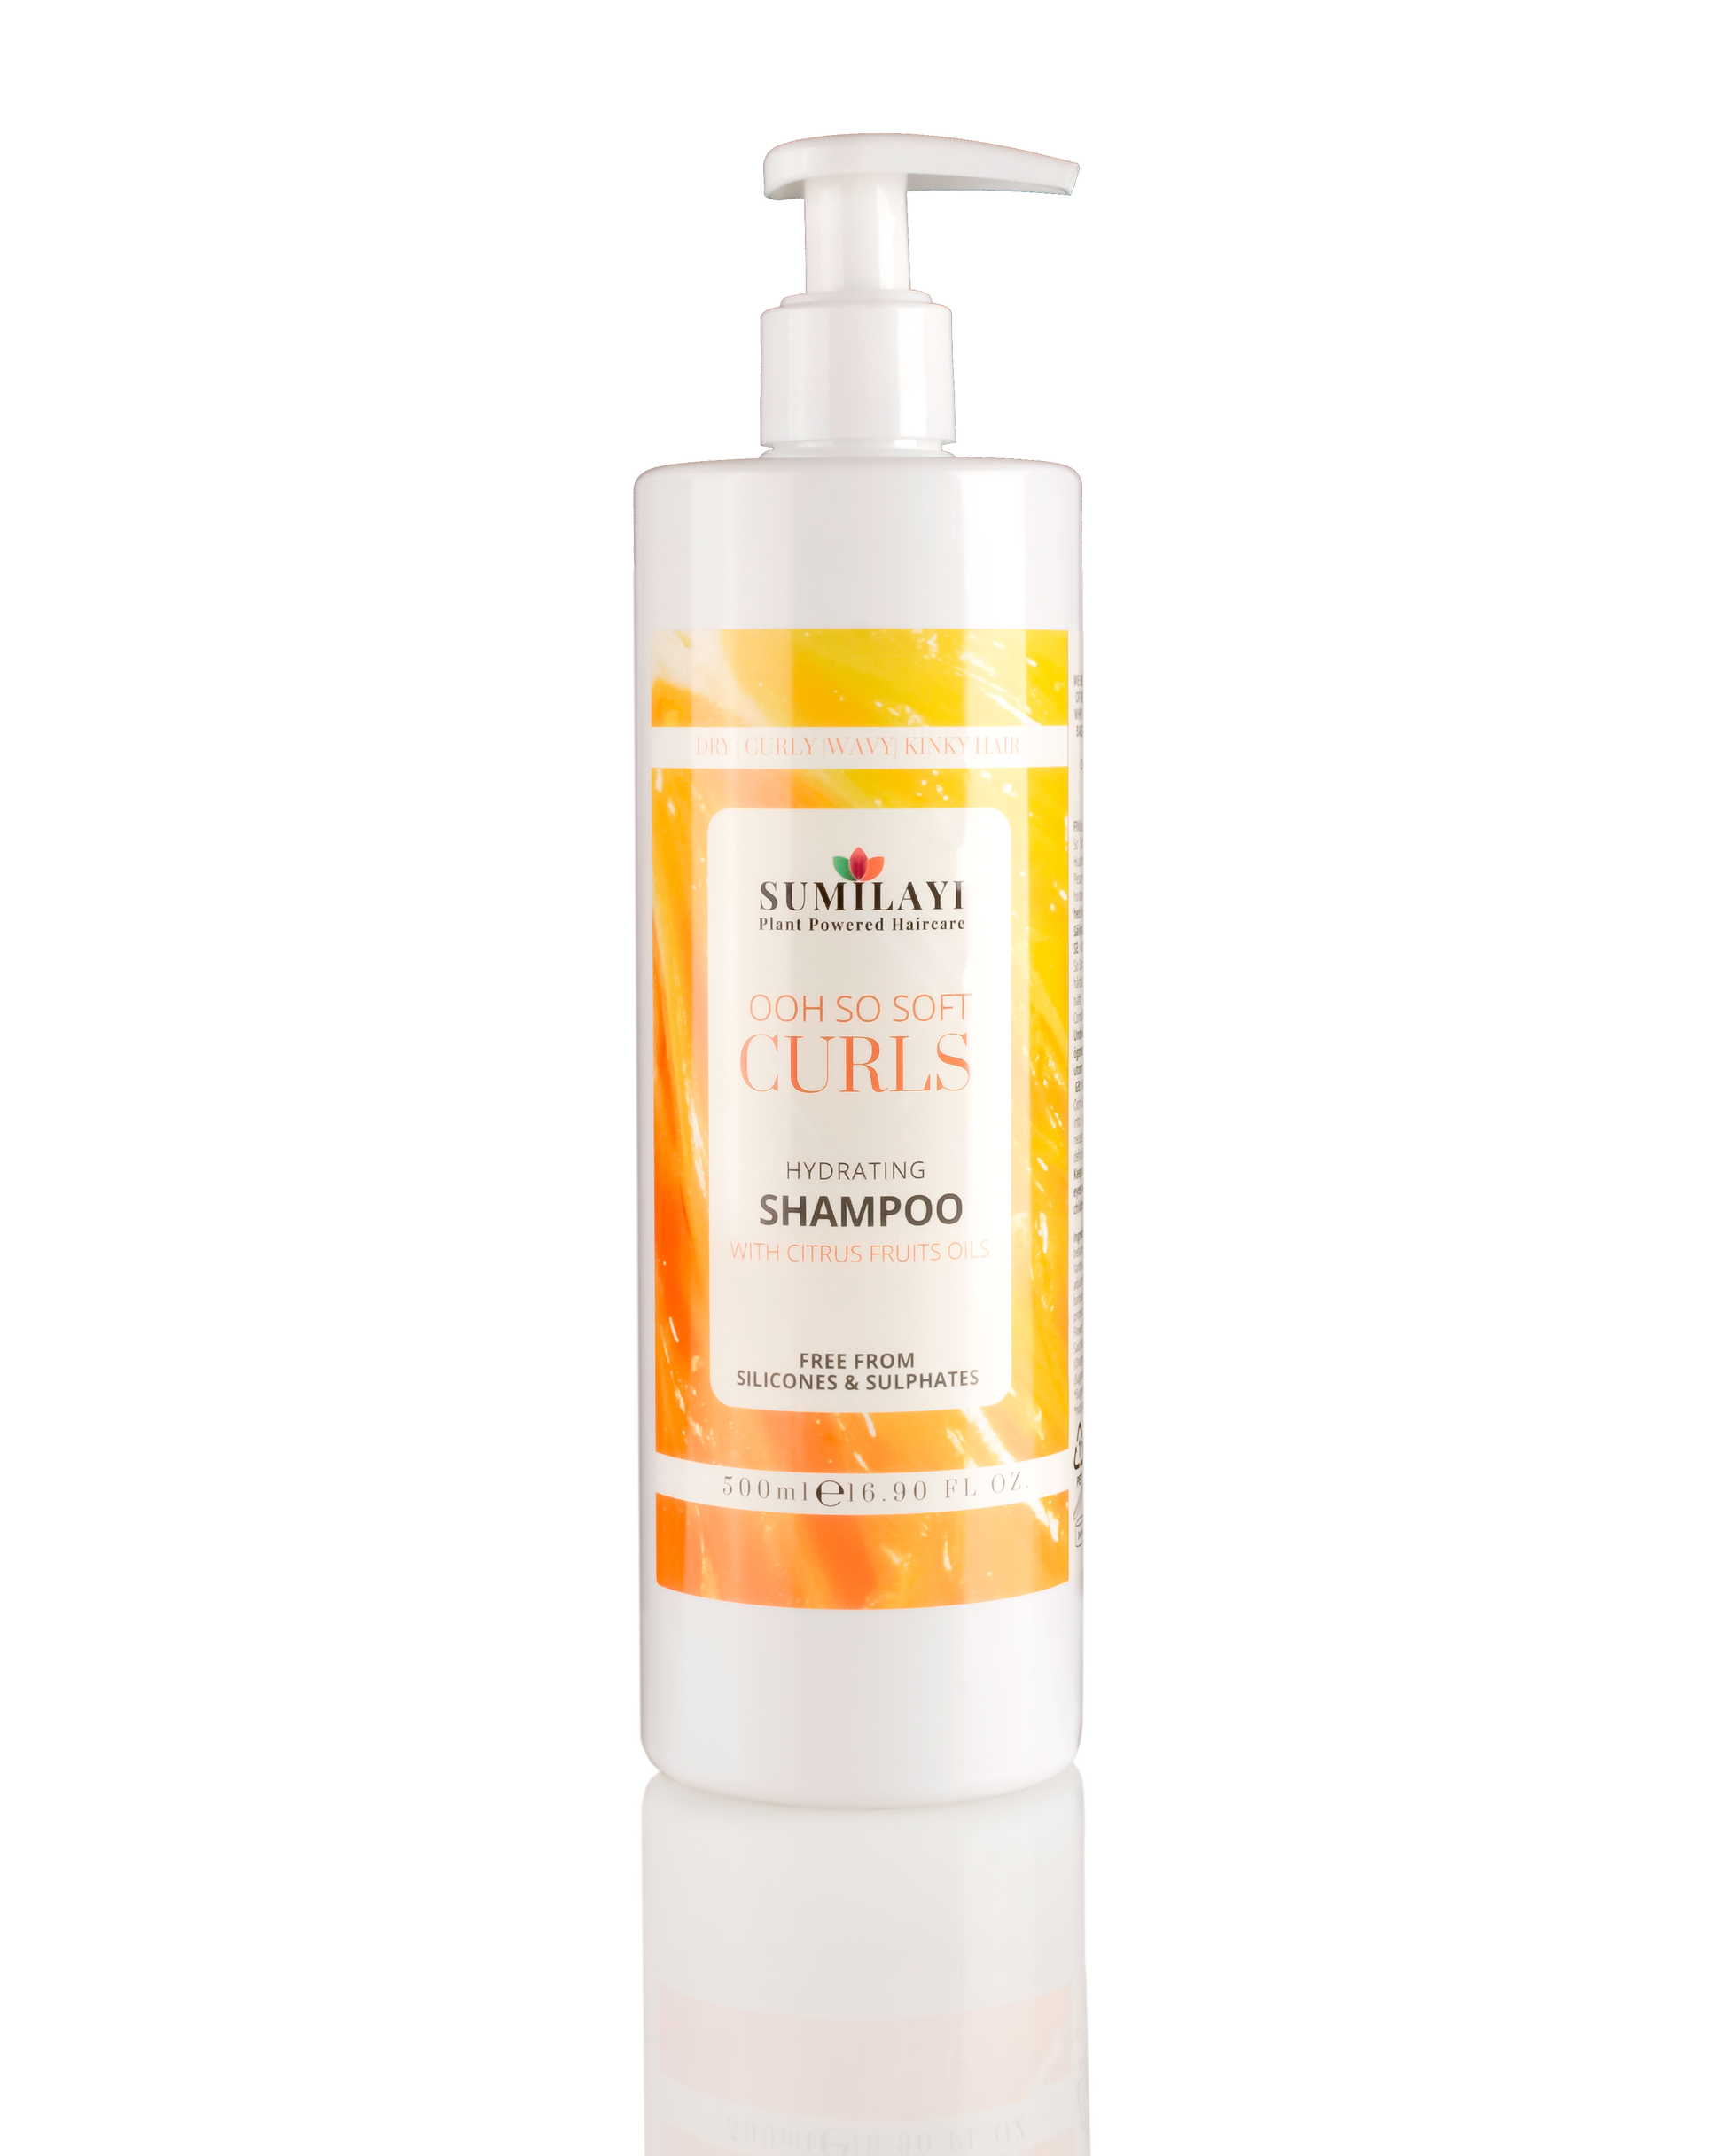 Ooh So Soft Curls - Hydrating Shampoo 500ml - Sumilayi Plant-Powered Haircare